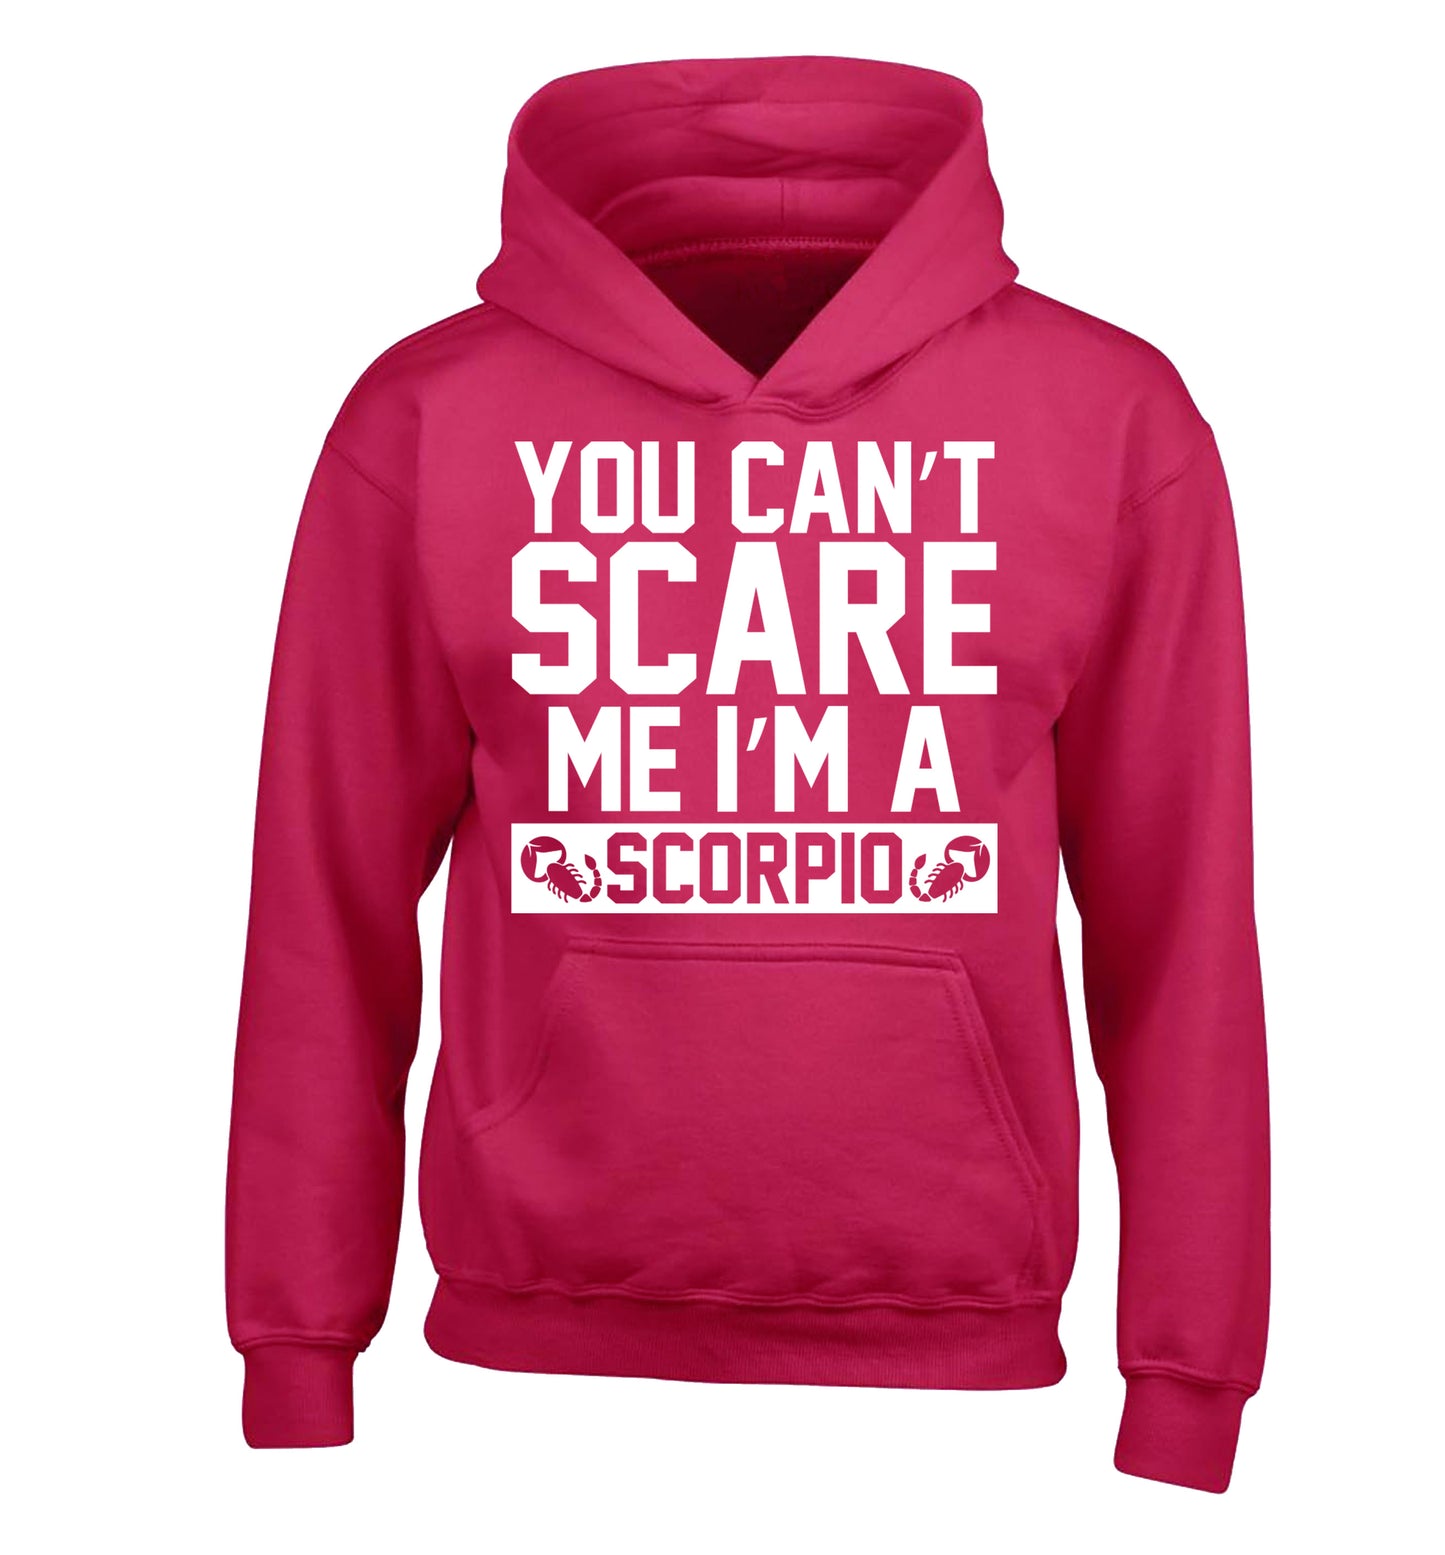 You can't scare me I'm a scorpio children's pink hoodie 12-13 Years